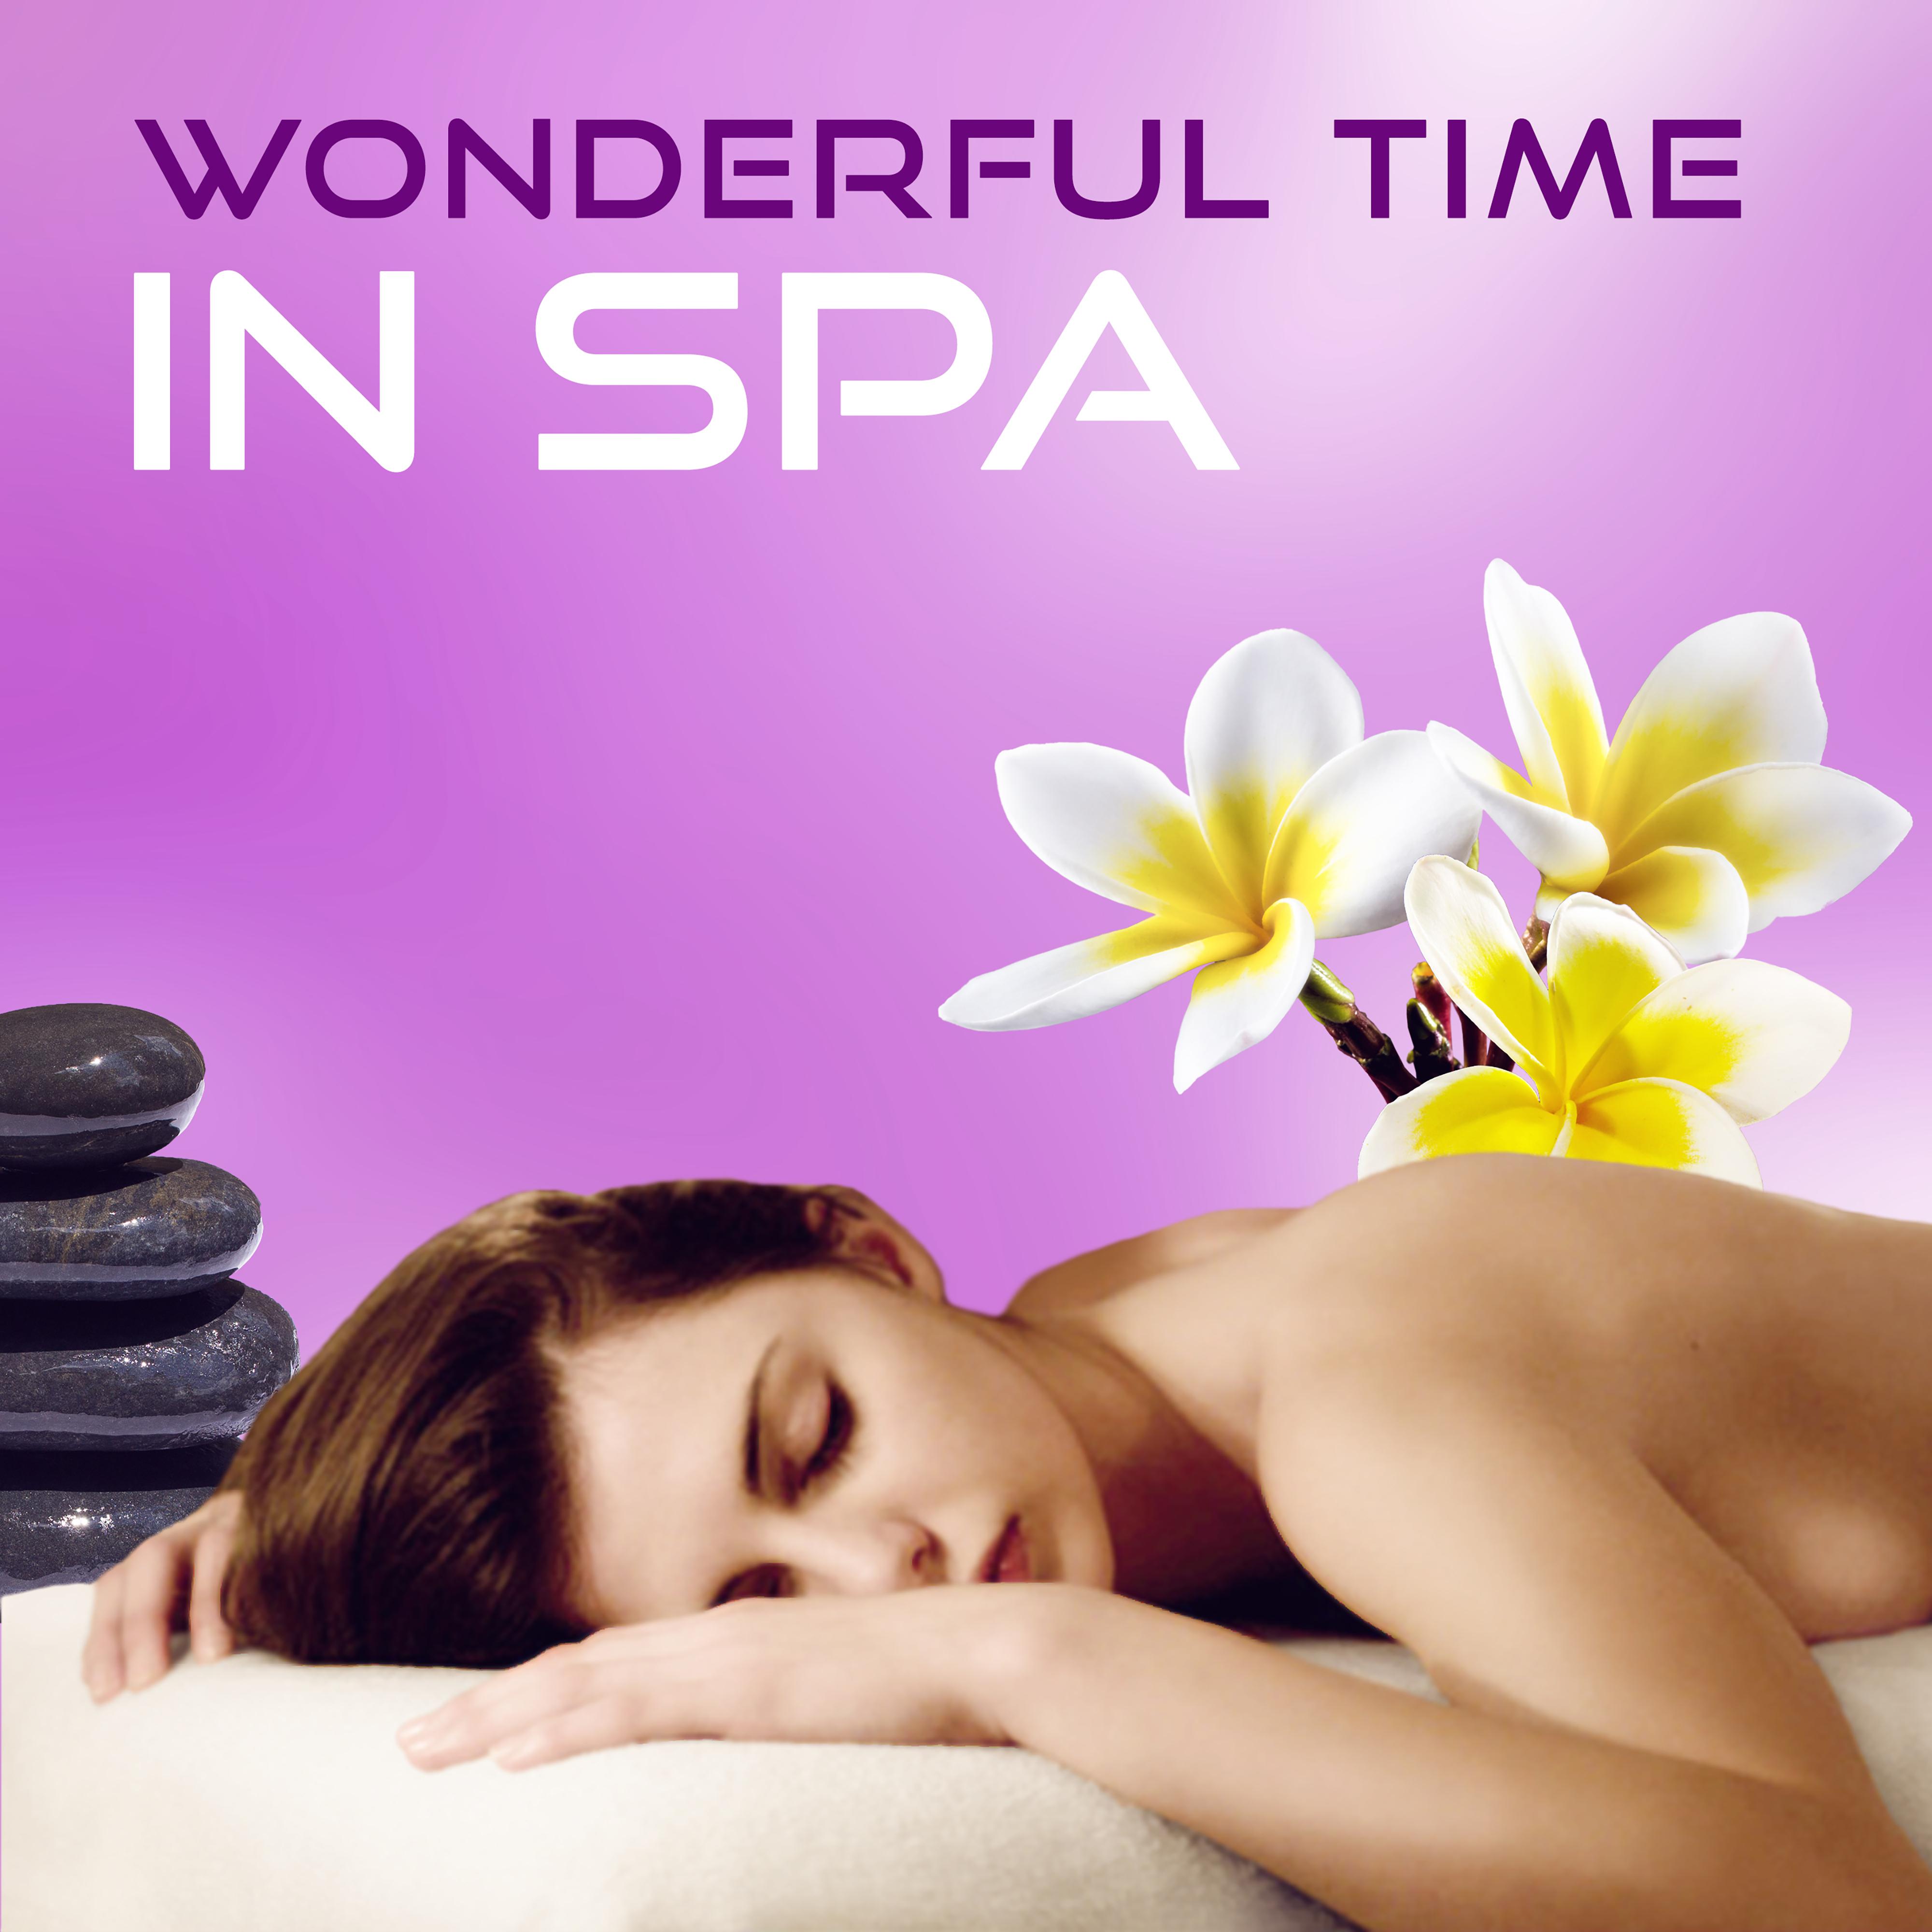 Wonderful Time in Spa – Healing Music for Wellness, Deep Relaxation, Sensual Massage, Serenity for Soul